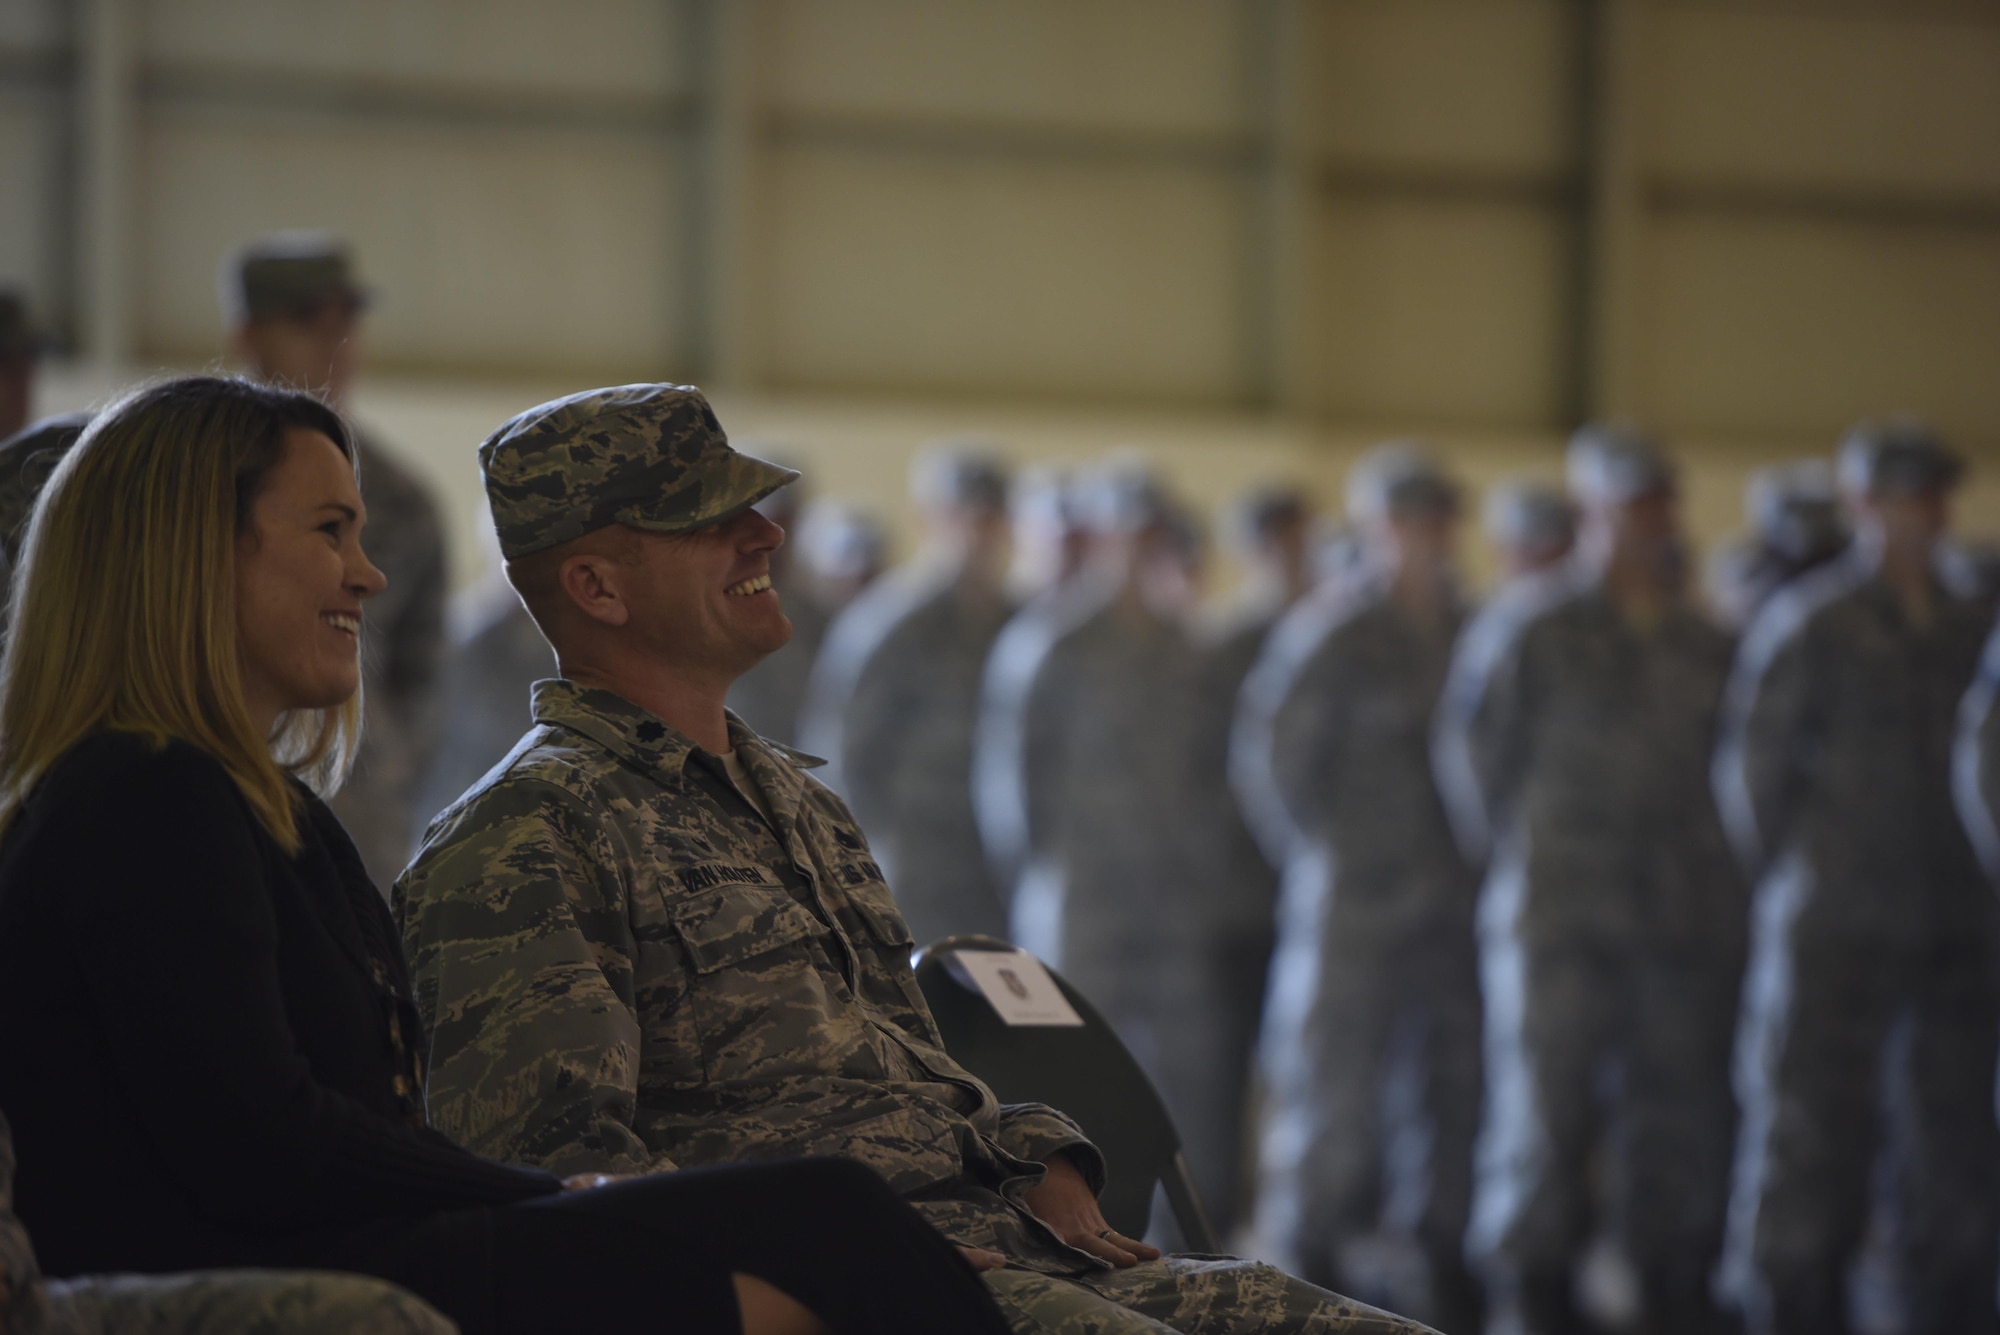 Lt. Col. Neal Van Houten, former 23d Equipment Maintenance Squadron commander, shares a laugh before taking command of the newly re-designated 23d Maintenance Squadron, Nov. 9, 2017, at Moody Air Force Base, Ga. Van Houten took command of Air Combat Command’s second largest squadron, leading the 800 men and women who are responsible for executing safe and reliable maintenance on aircraft systems, ground equipment and munitions to support the 23d Wing's attack and rescue missions. (U.S. Air Force photo by Senior Airman Greg Nash)